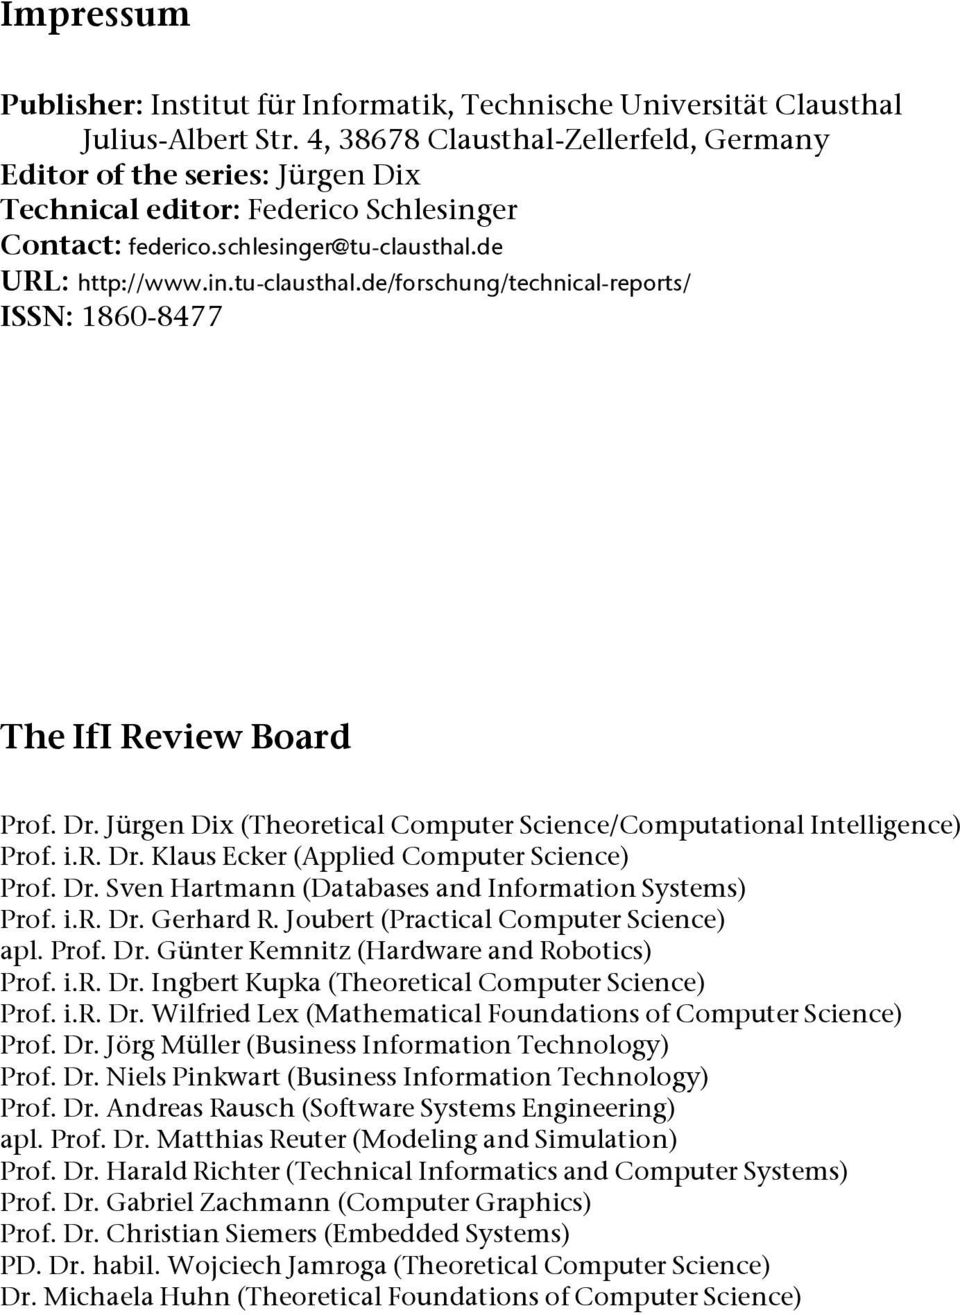 de URL: http://www.in.tu-clausthal.de/forschung/technical-reports/ ISSN: 1860-8477 The IfI Review Board Prof. Dr. Jürgen Dix (Theoretical Computer Science/Computational Intelligence) Prof. i.r. Dr. Klaus Ecker (Applied Computer Science) Prof.